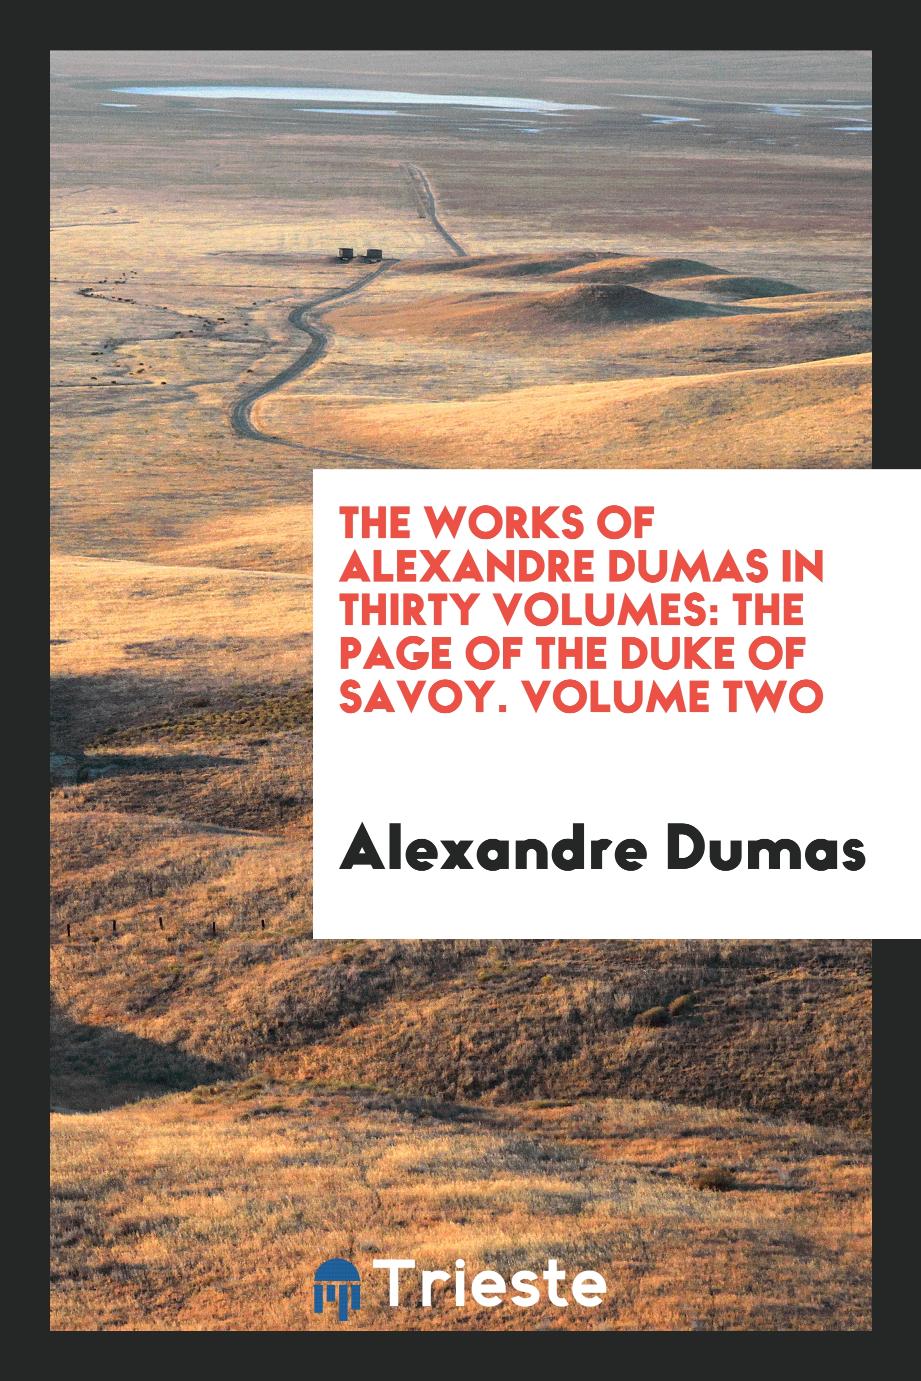 The Works of Alexandre Dumas in Thirty Volumes: The Page of the Duke of Savoy. Volume Two